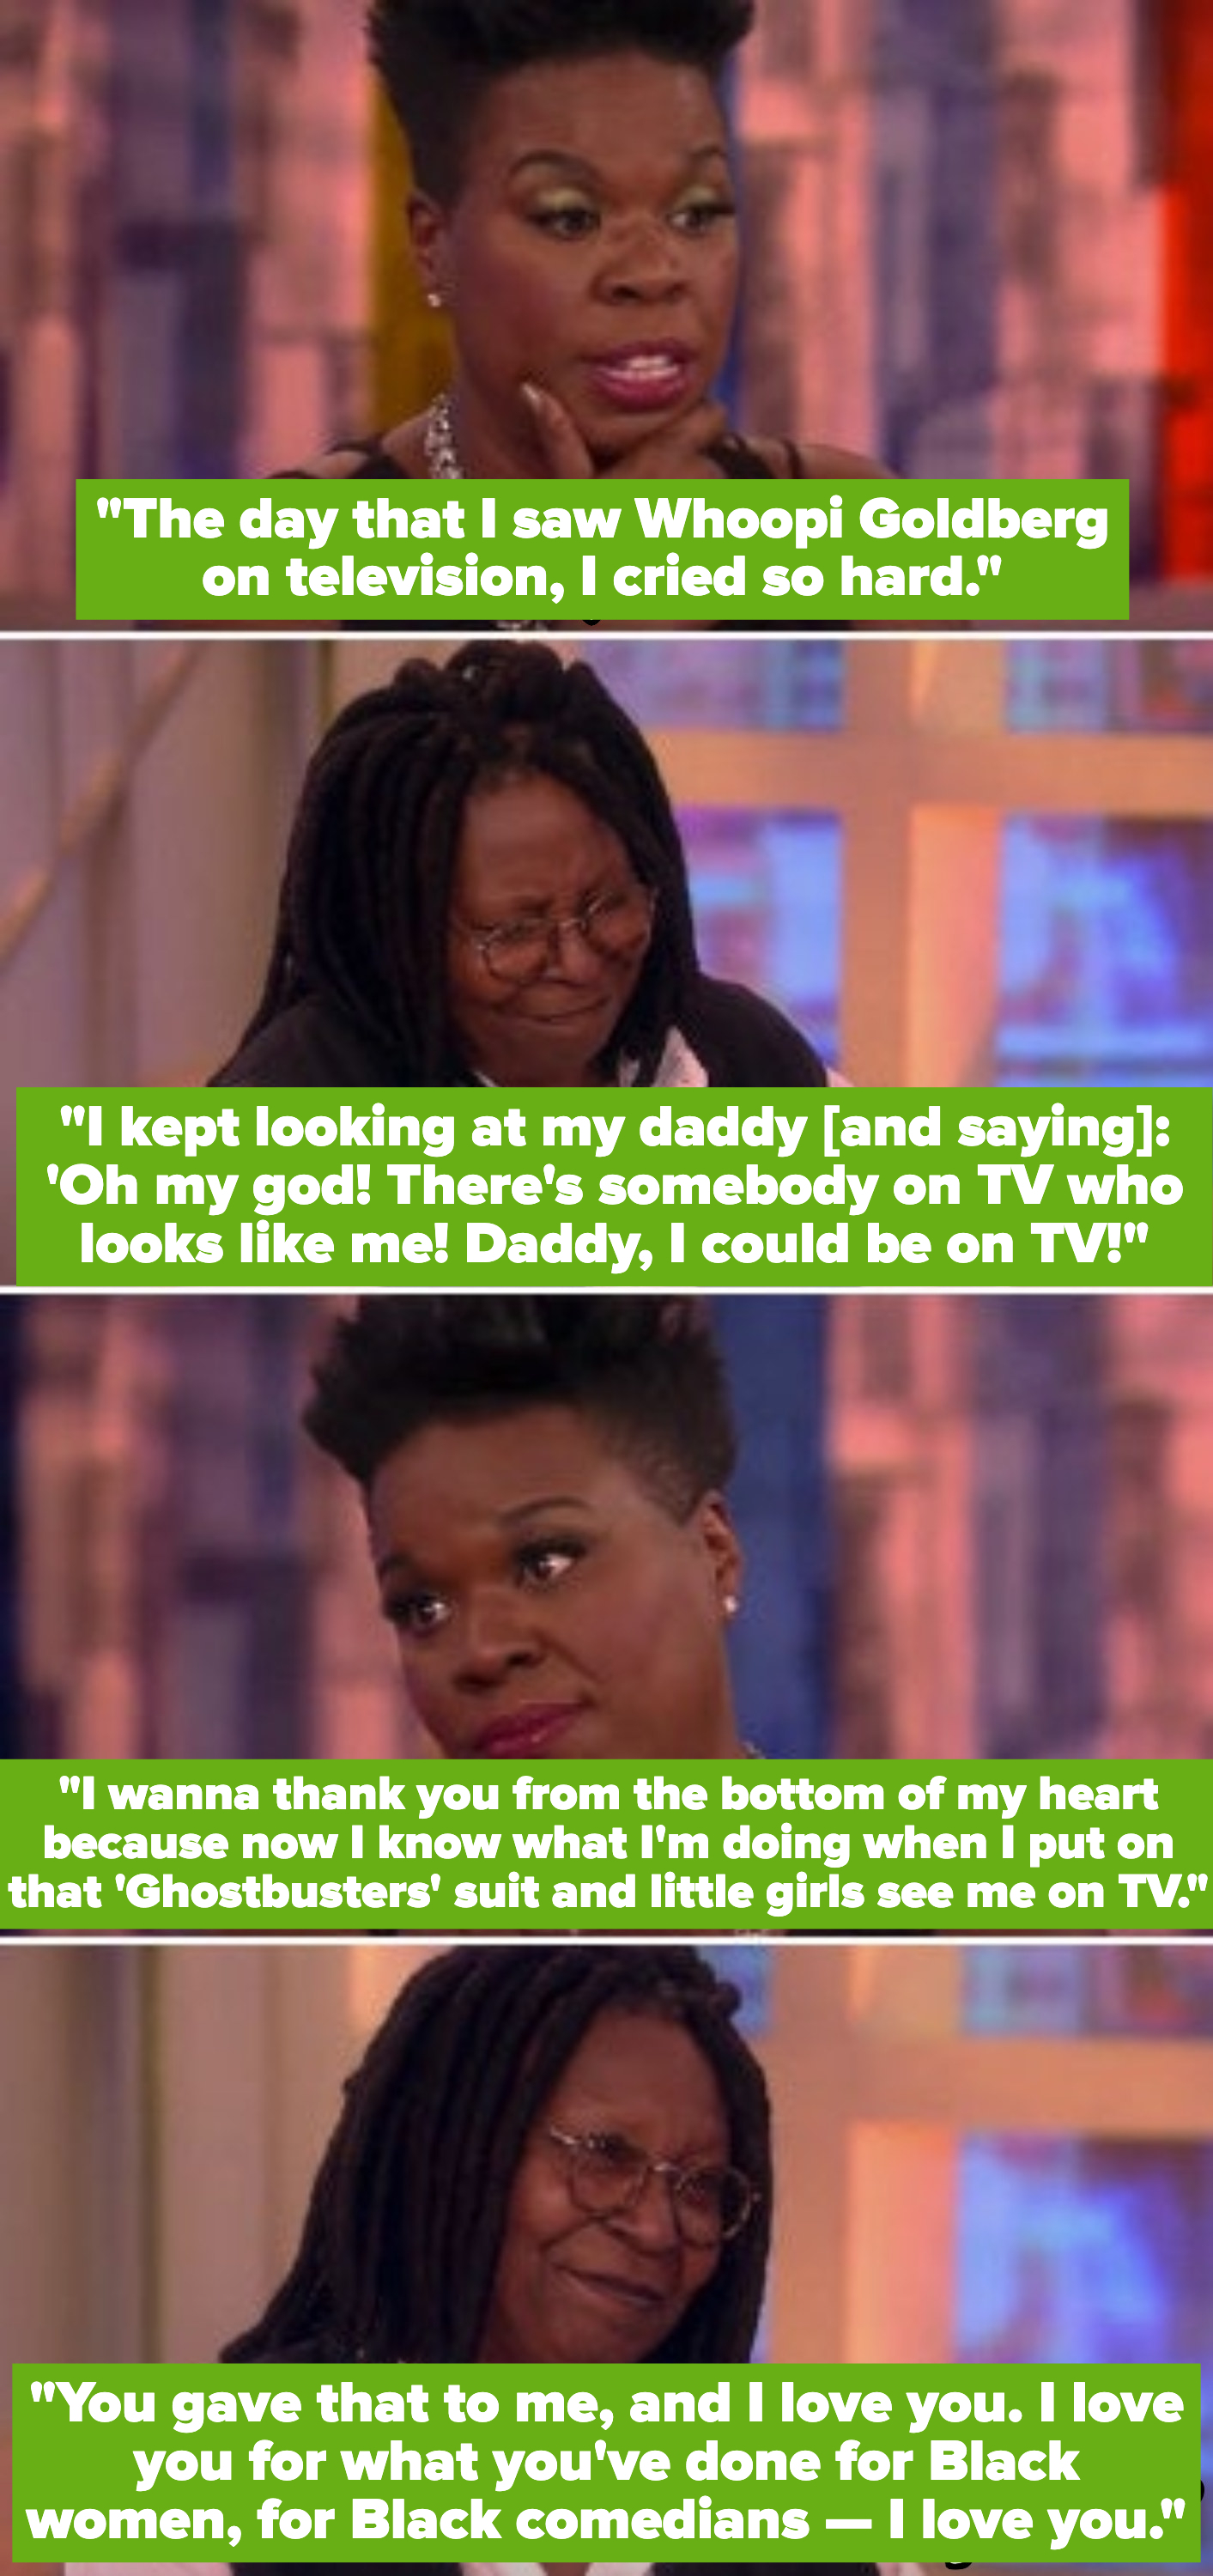 Leslie Jones telling Whoopi: &quot;I wanna thank you from the bottom of my heart because now I know what I&#x27;m doing when I put on that &#x27;Ghostbusters&#x27; suit and little girls see me on TV&quot;